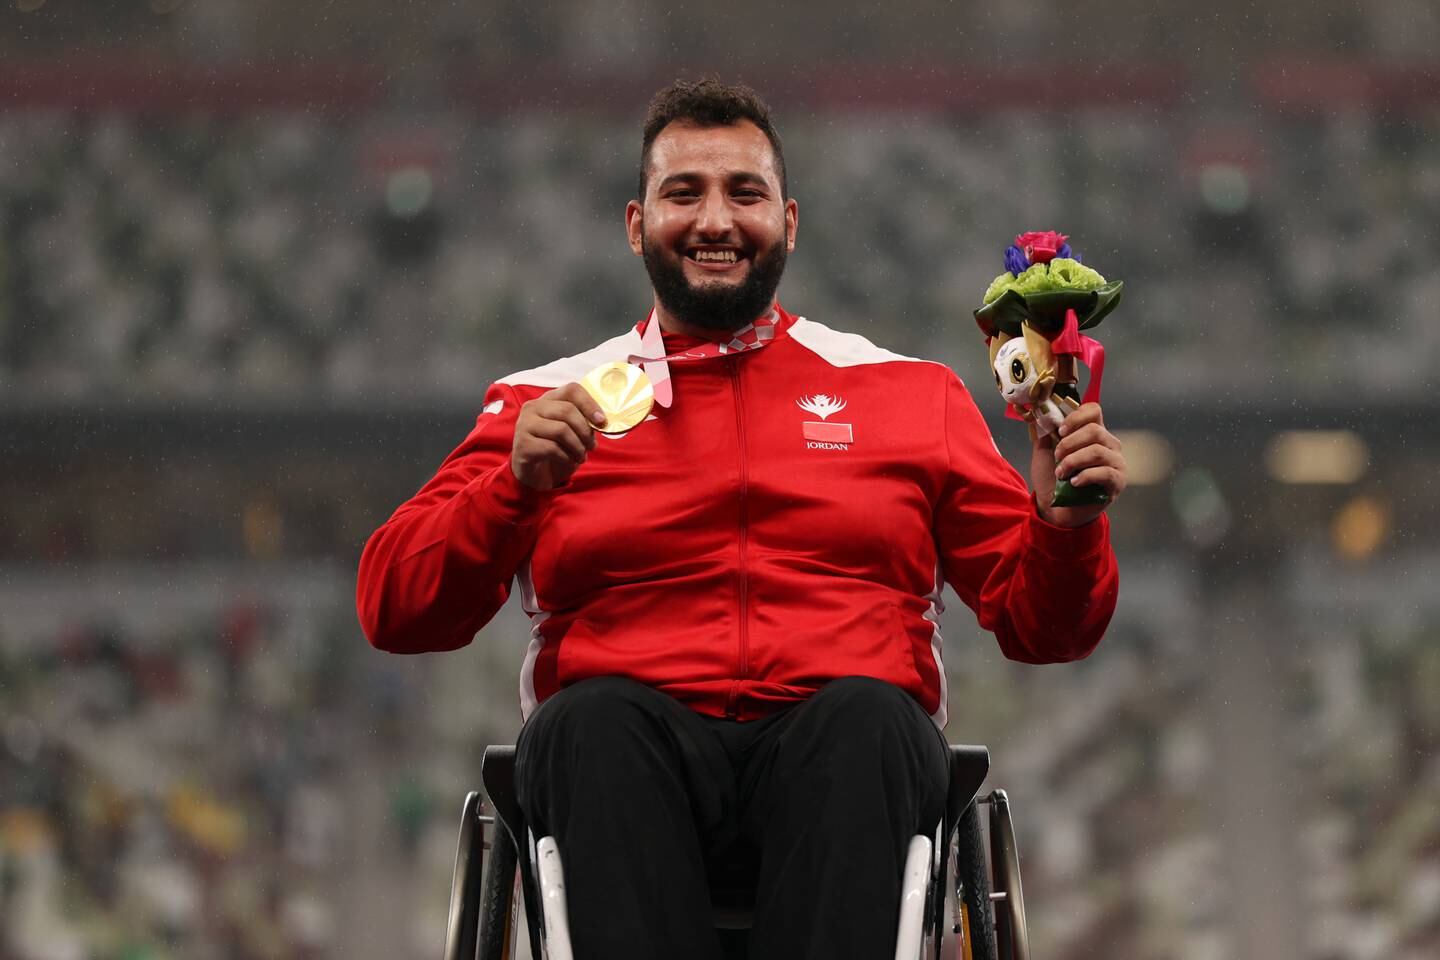 Jordan's Ahmad Hindi with his gold medal at the Olympic Stadium in Tokyo. Getty